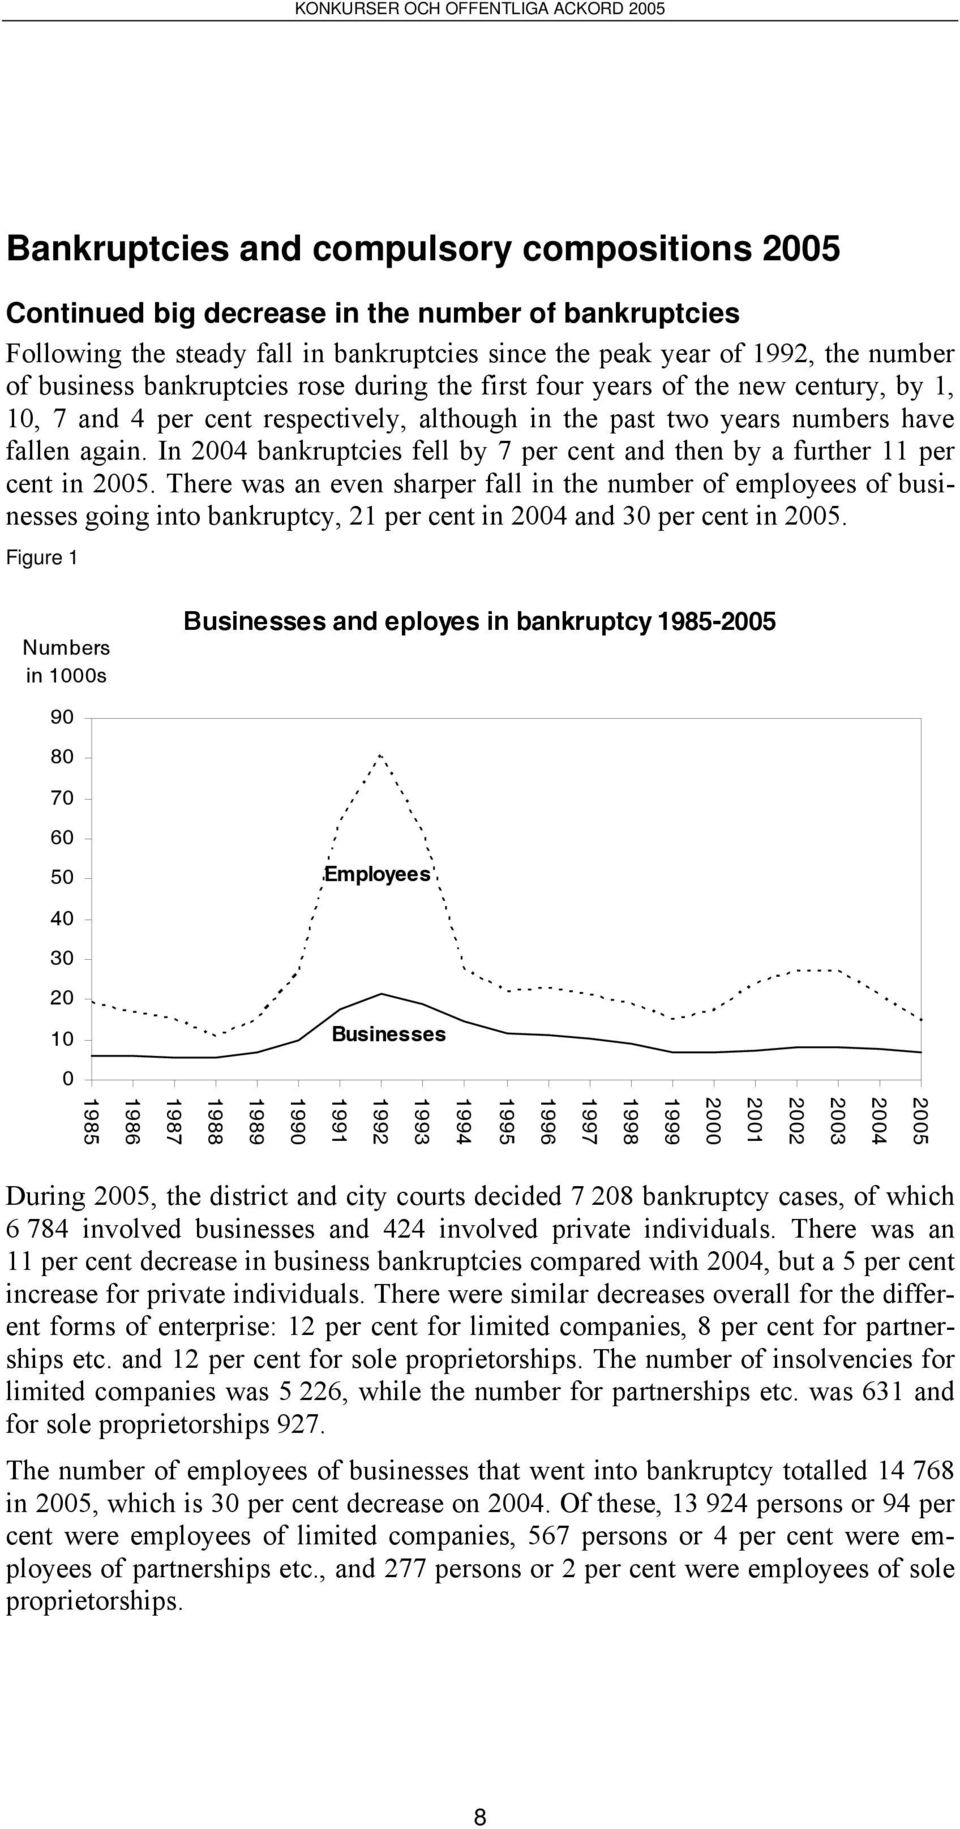 In 2004 bankruptcies fell by 7 per cent and then by a further 11 per cent in 2005.